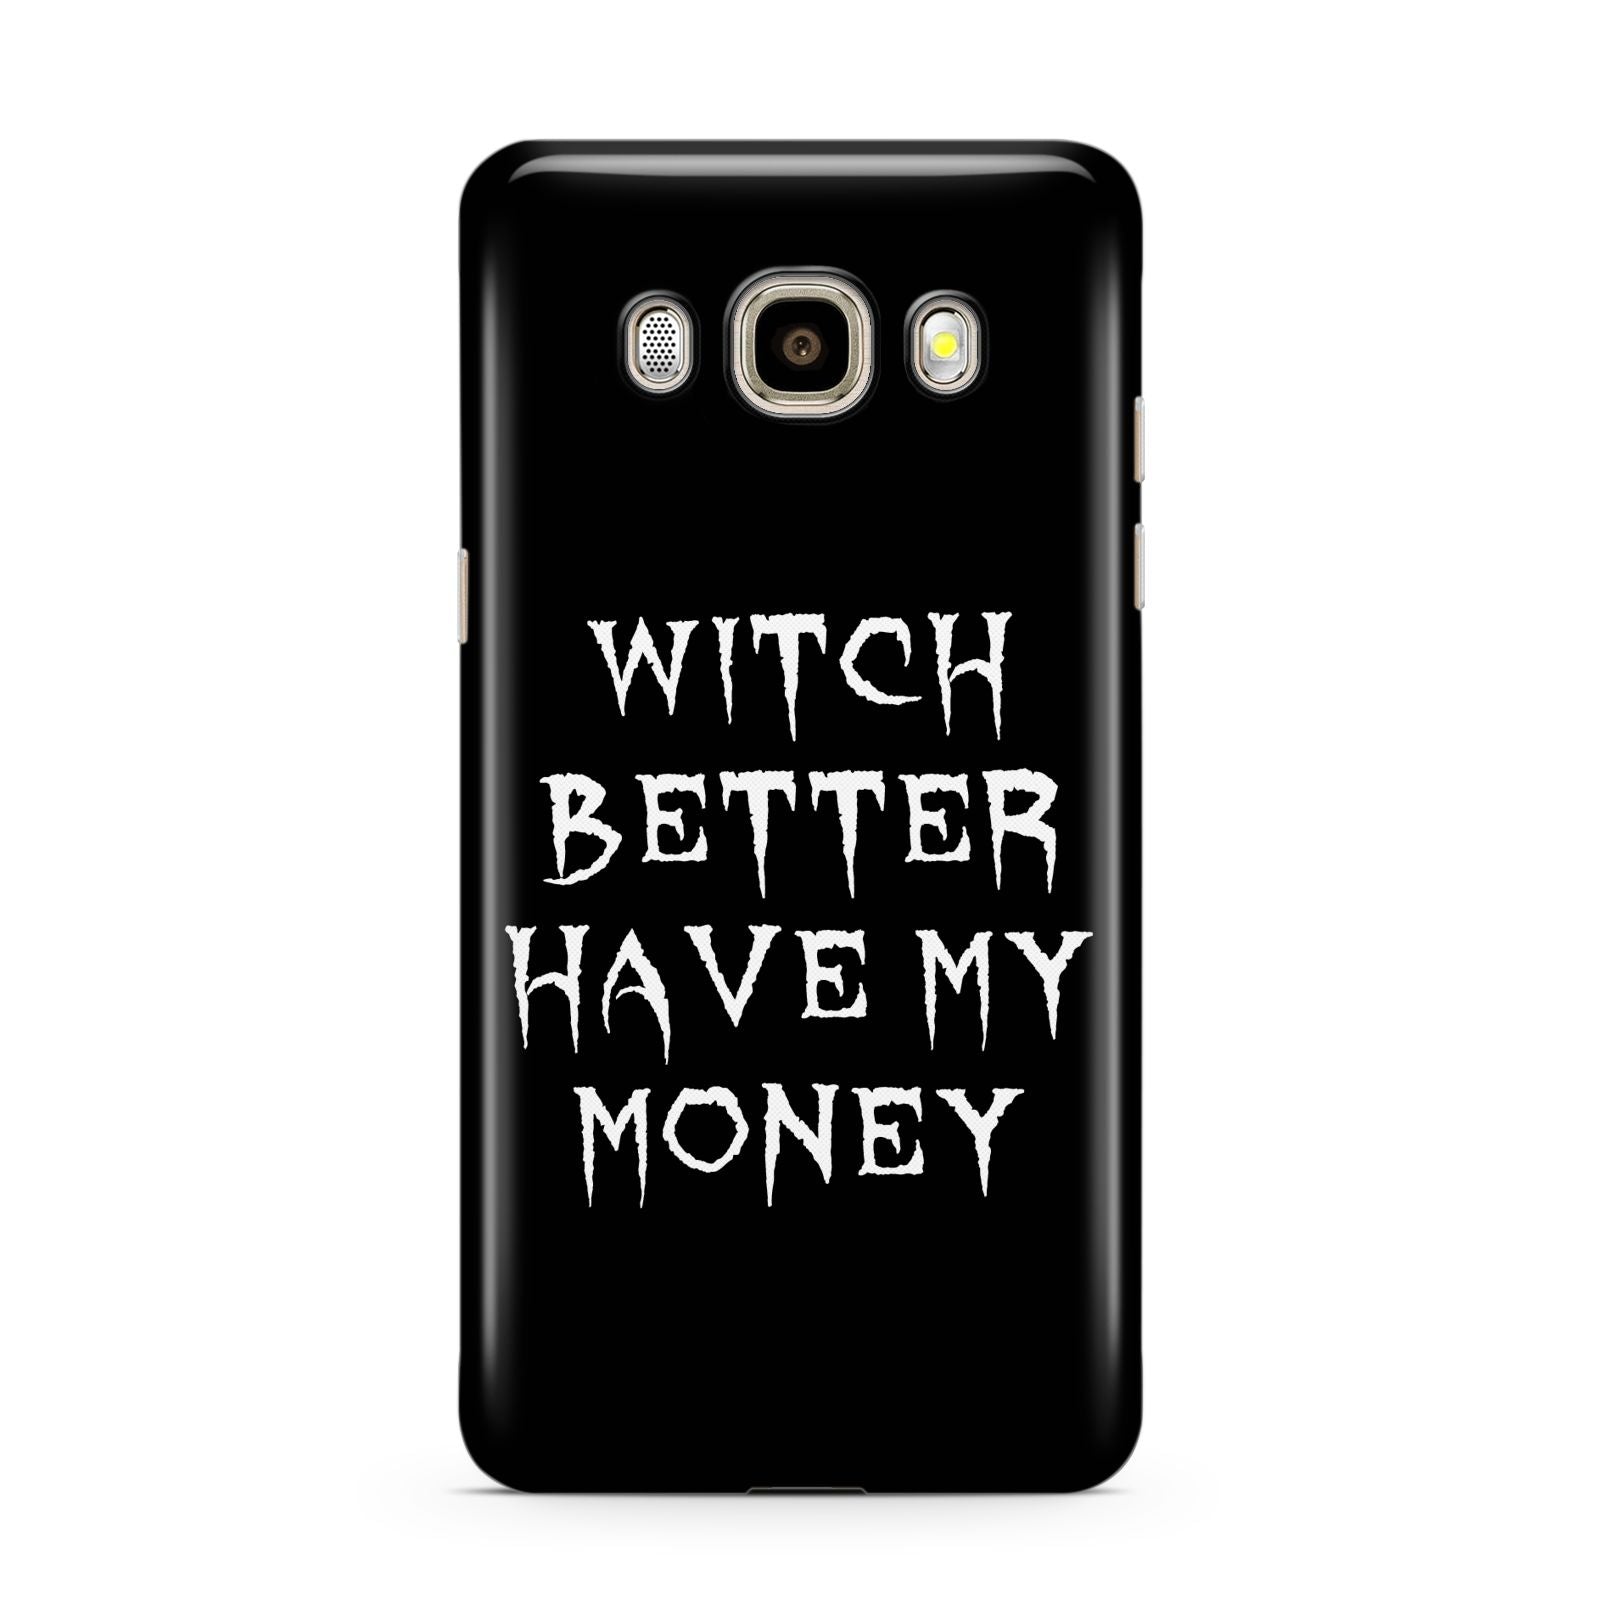 Witch Better Have My Money Samsung Galaxy J7 2016 Case on gold phone